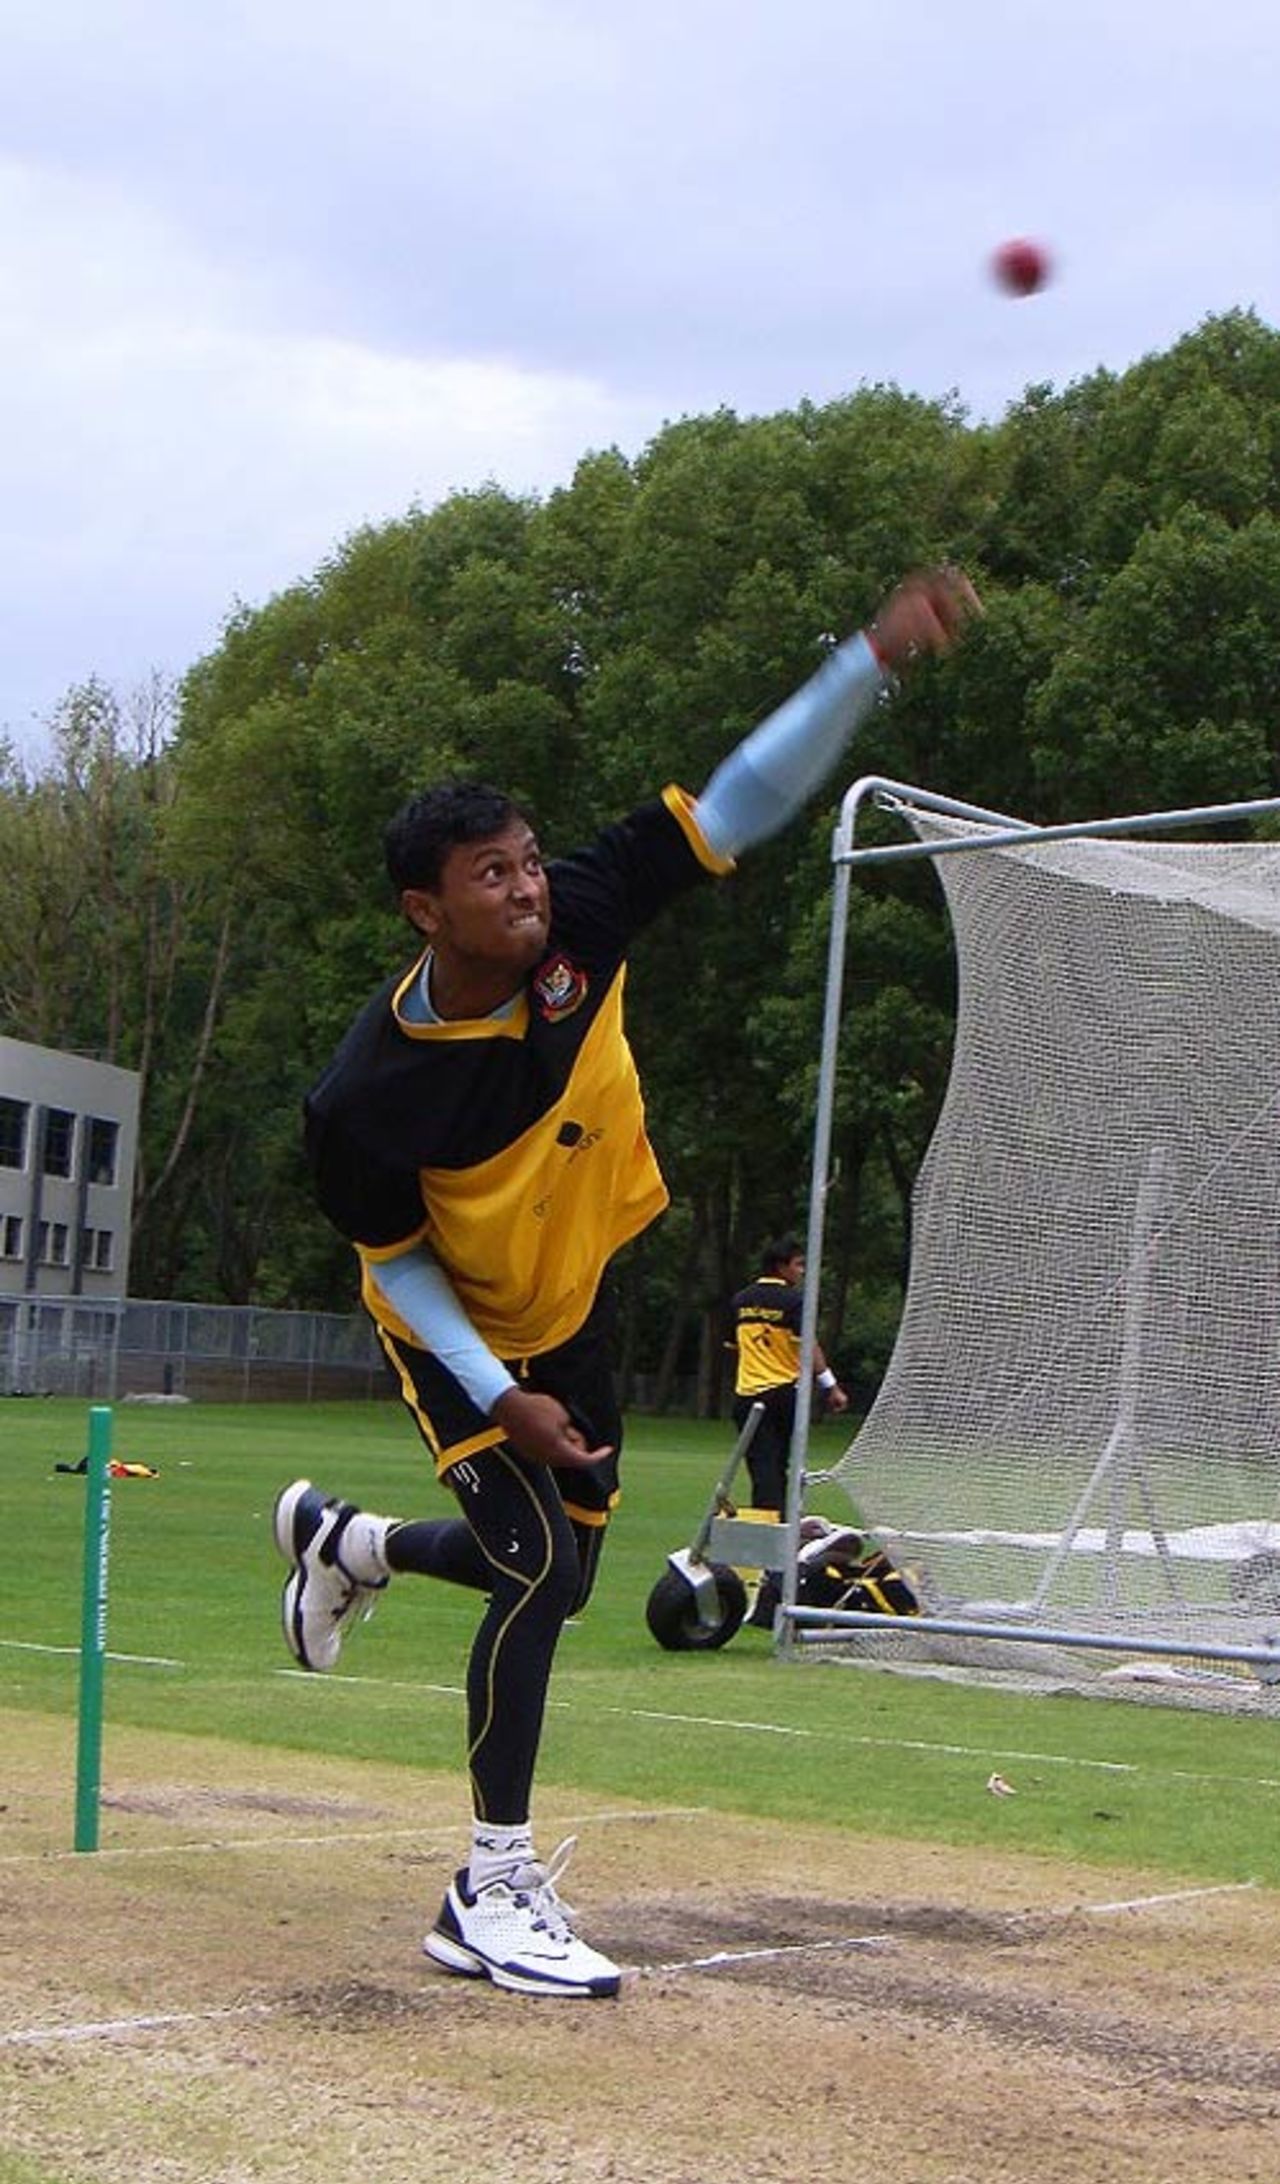 Enamul Haque delivers a ball in a practice session, Dunedin, January 2, 2008